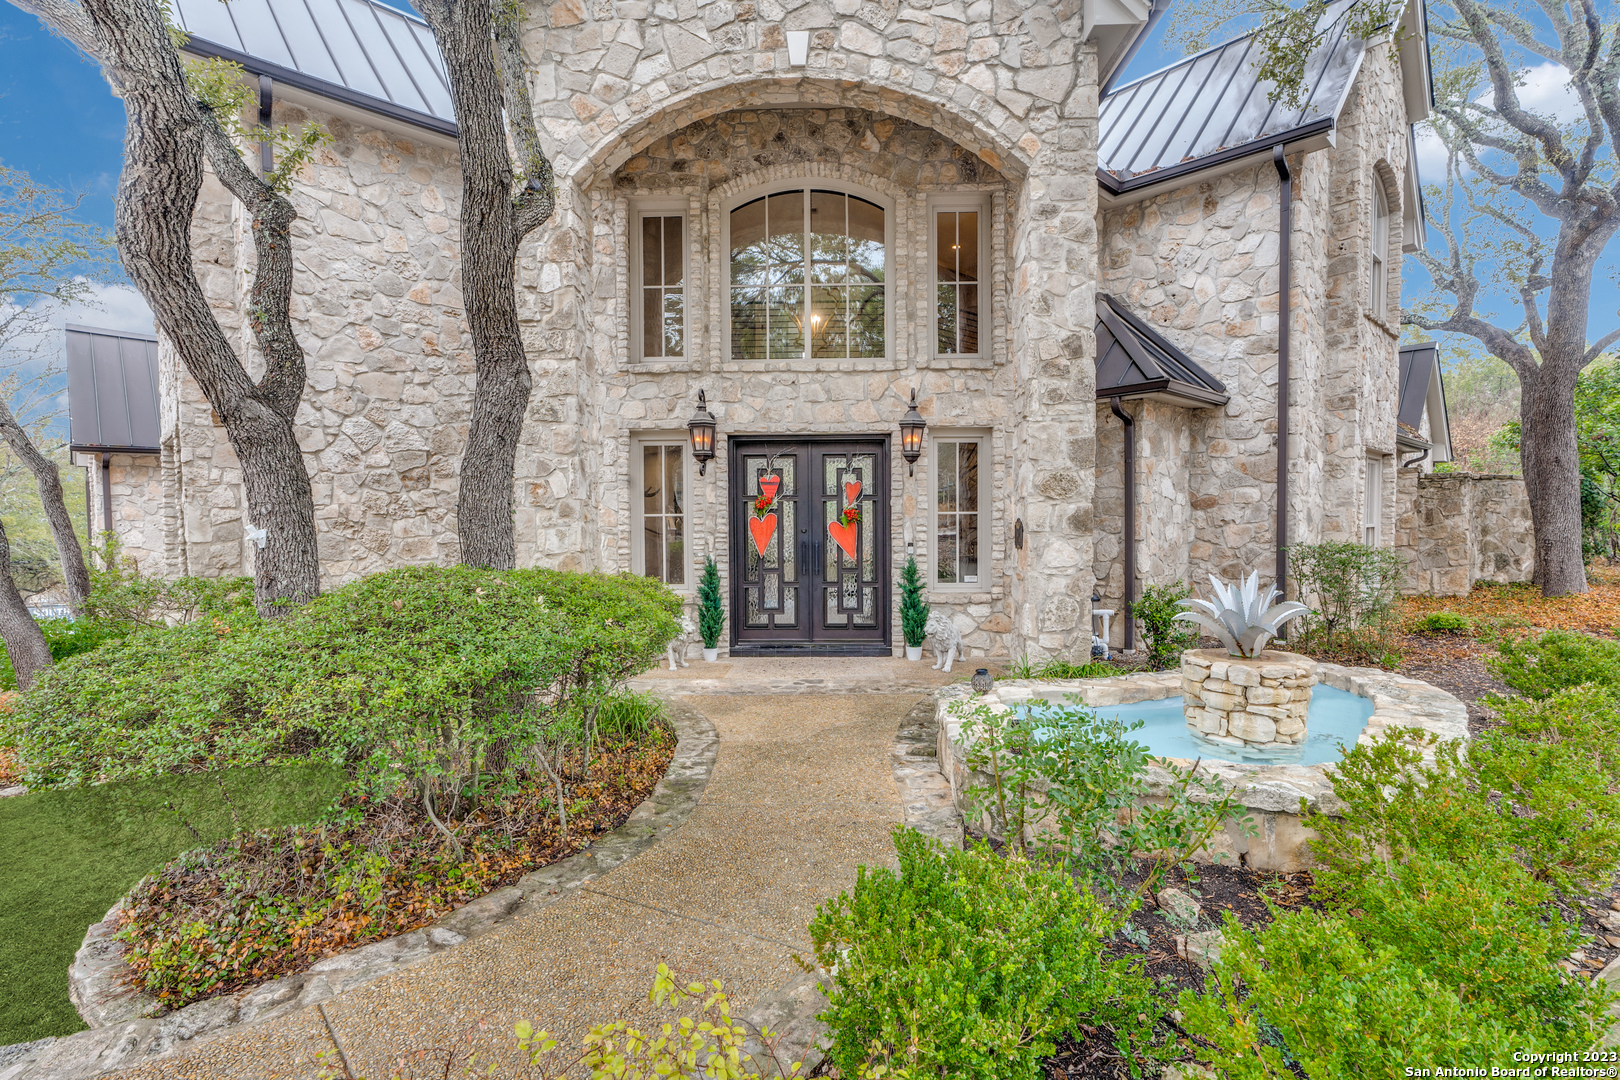 Exquisite, finely-detailed transitional modern estate in the luxurious subdivision of Dominion. This community offers an option to be a member of one of the premier private country clubs in San Antonio. A rare find, nearly an acre of land! The exterior has a regal fashion that consists of natural stone with a breathtaking double door front entrance. The interior has been professionally designed and decorated with wains coated ceilings, custom cabinetry, stone accents, recently renovated staircases, wet bar and a rich wood paneled study. 5 bedroom, 5.5 baths, large game room, media room with newly added surround sound. Mstrbed and 1 bedroom on first floor. Two fireplaces. Primary and a secondary is on main floor. Oversized private backyard oasis with built in kitchen, over 28k recently renovated salt water Kieth Zars heated pool, and spa. Roof and garage doors replaced in 2020, subzero built in fridge, Jenn air gas multi burner stove range with double ovens, Bosch dishwasher. Schedule a private tour now!